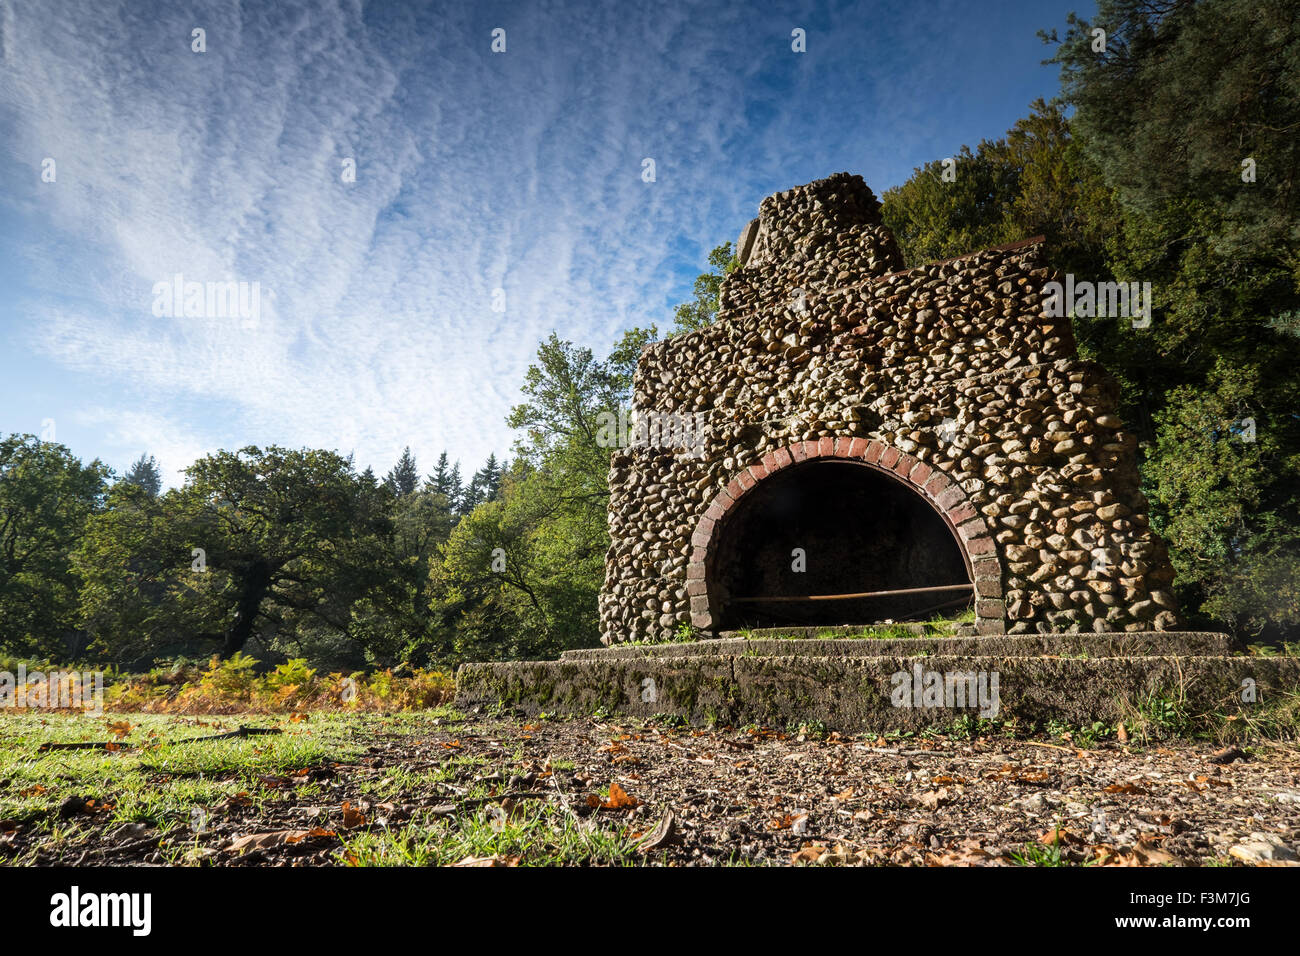 Portuguese Fireplace in The New Forest near Lyndhurst. The fireplace remains from a Portuguese camp in the First World War. Stock Photo